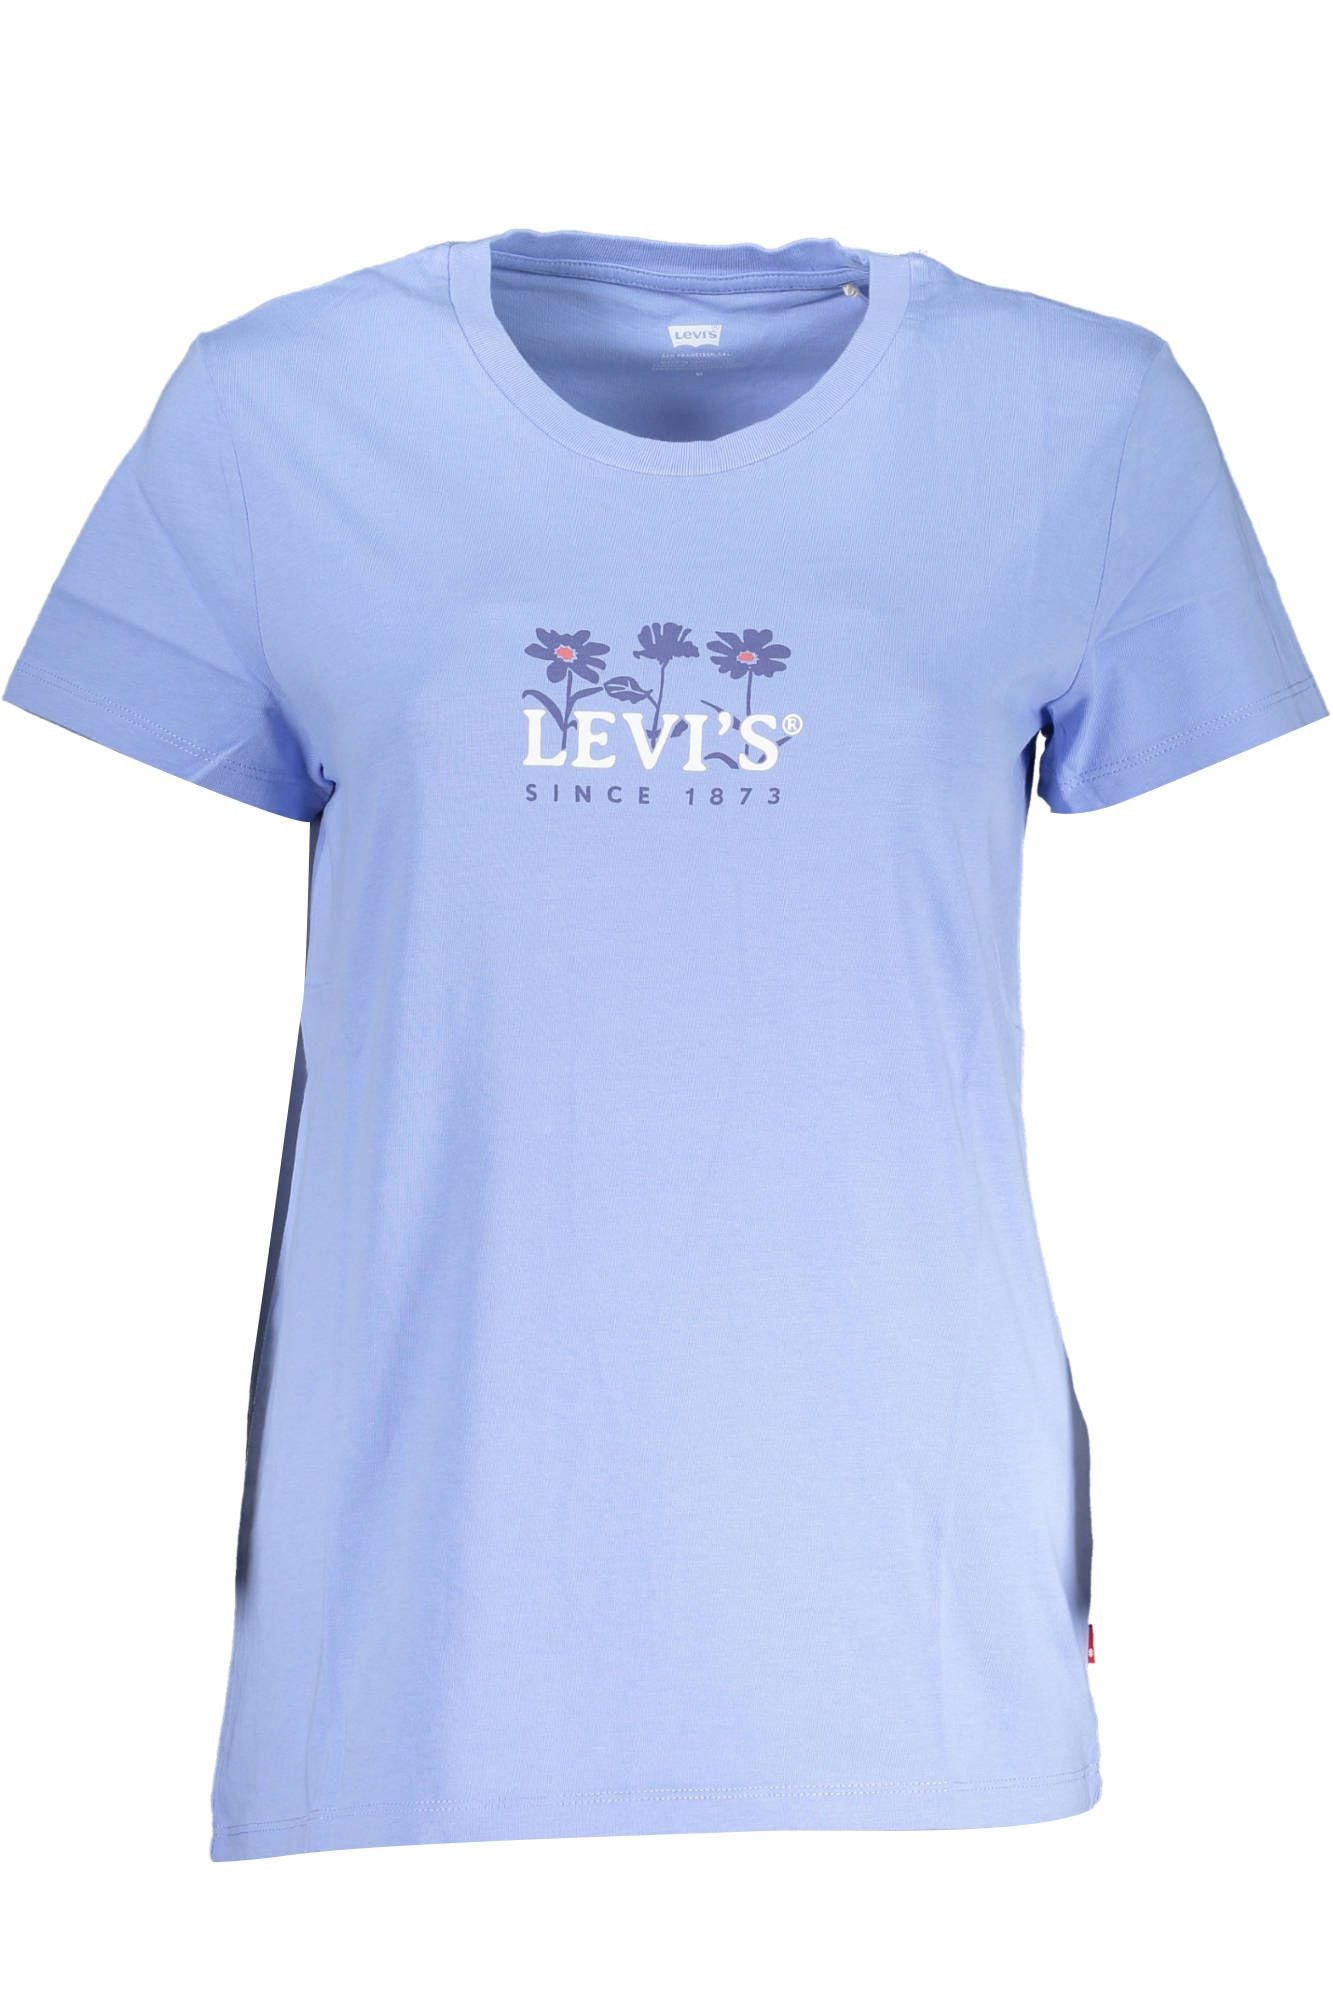 Levi's Light Blue Classic Cotton Tee with Print